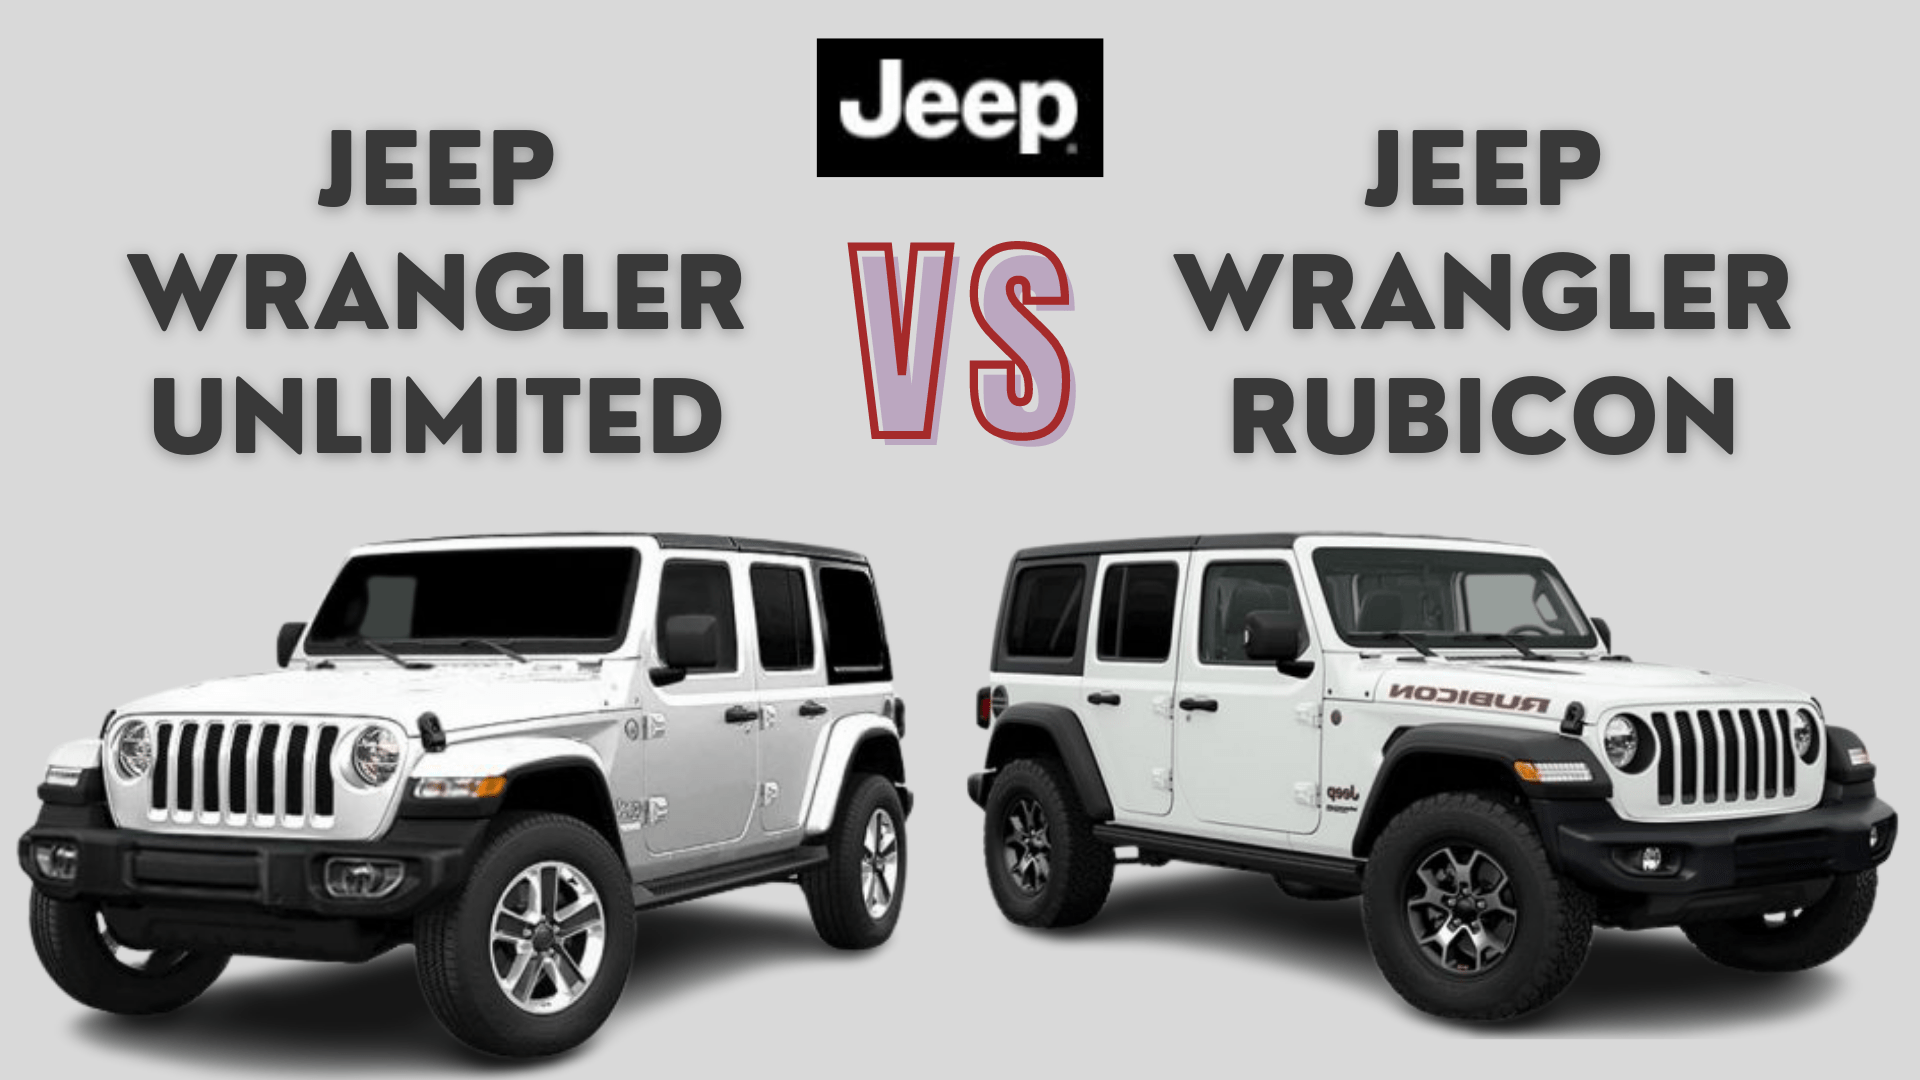 Arriba 79+ imagen whats the difference between jeep wrangler and rubicon